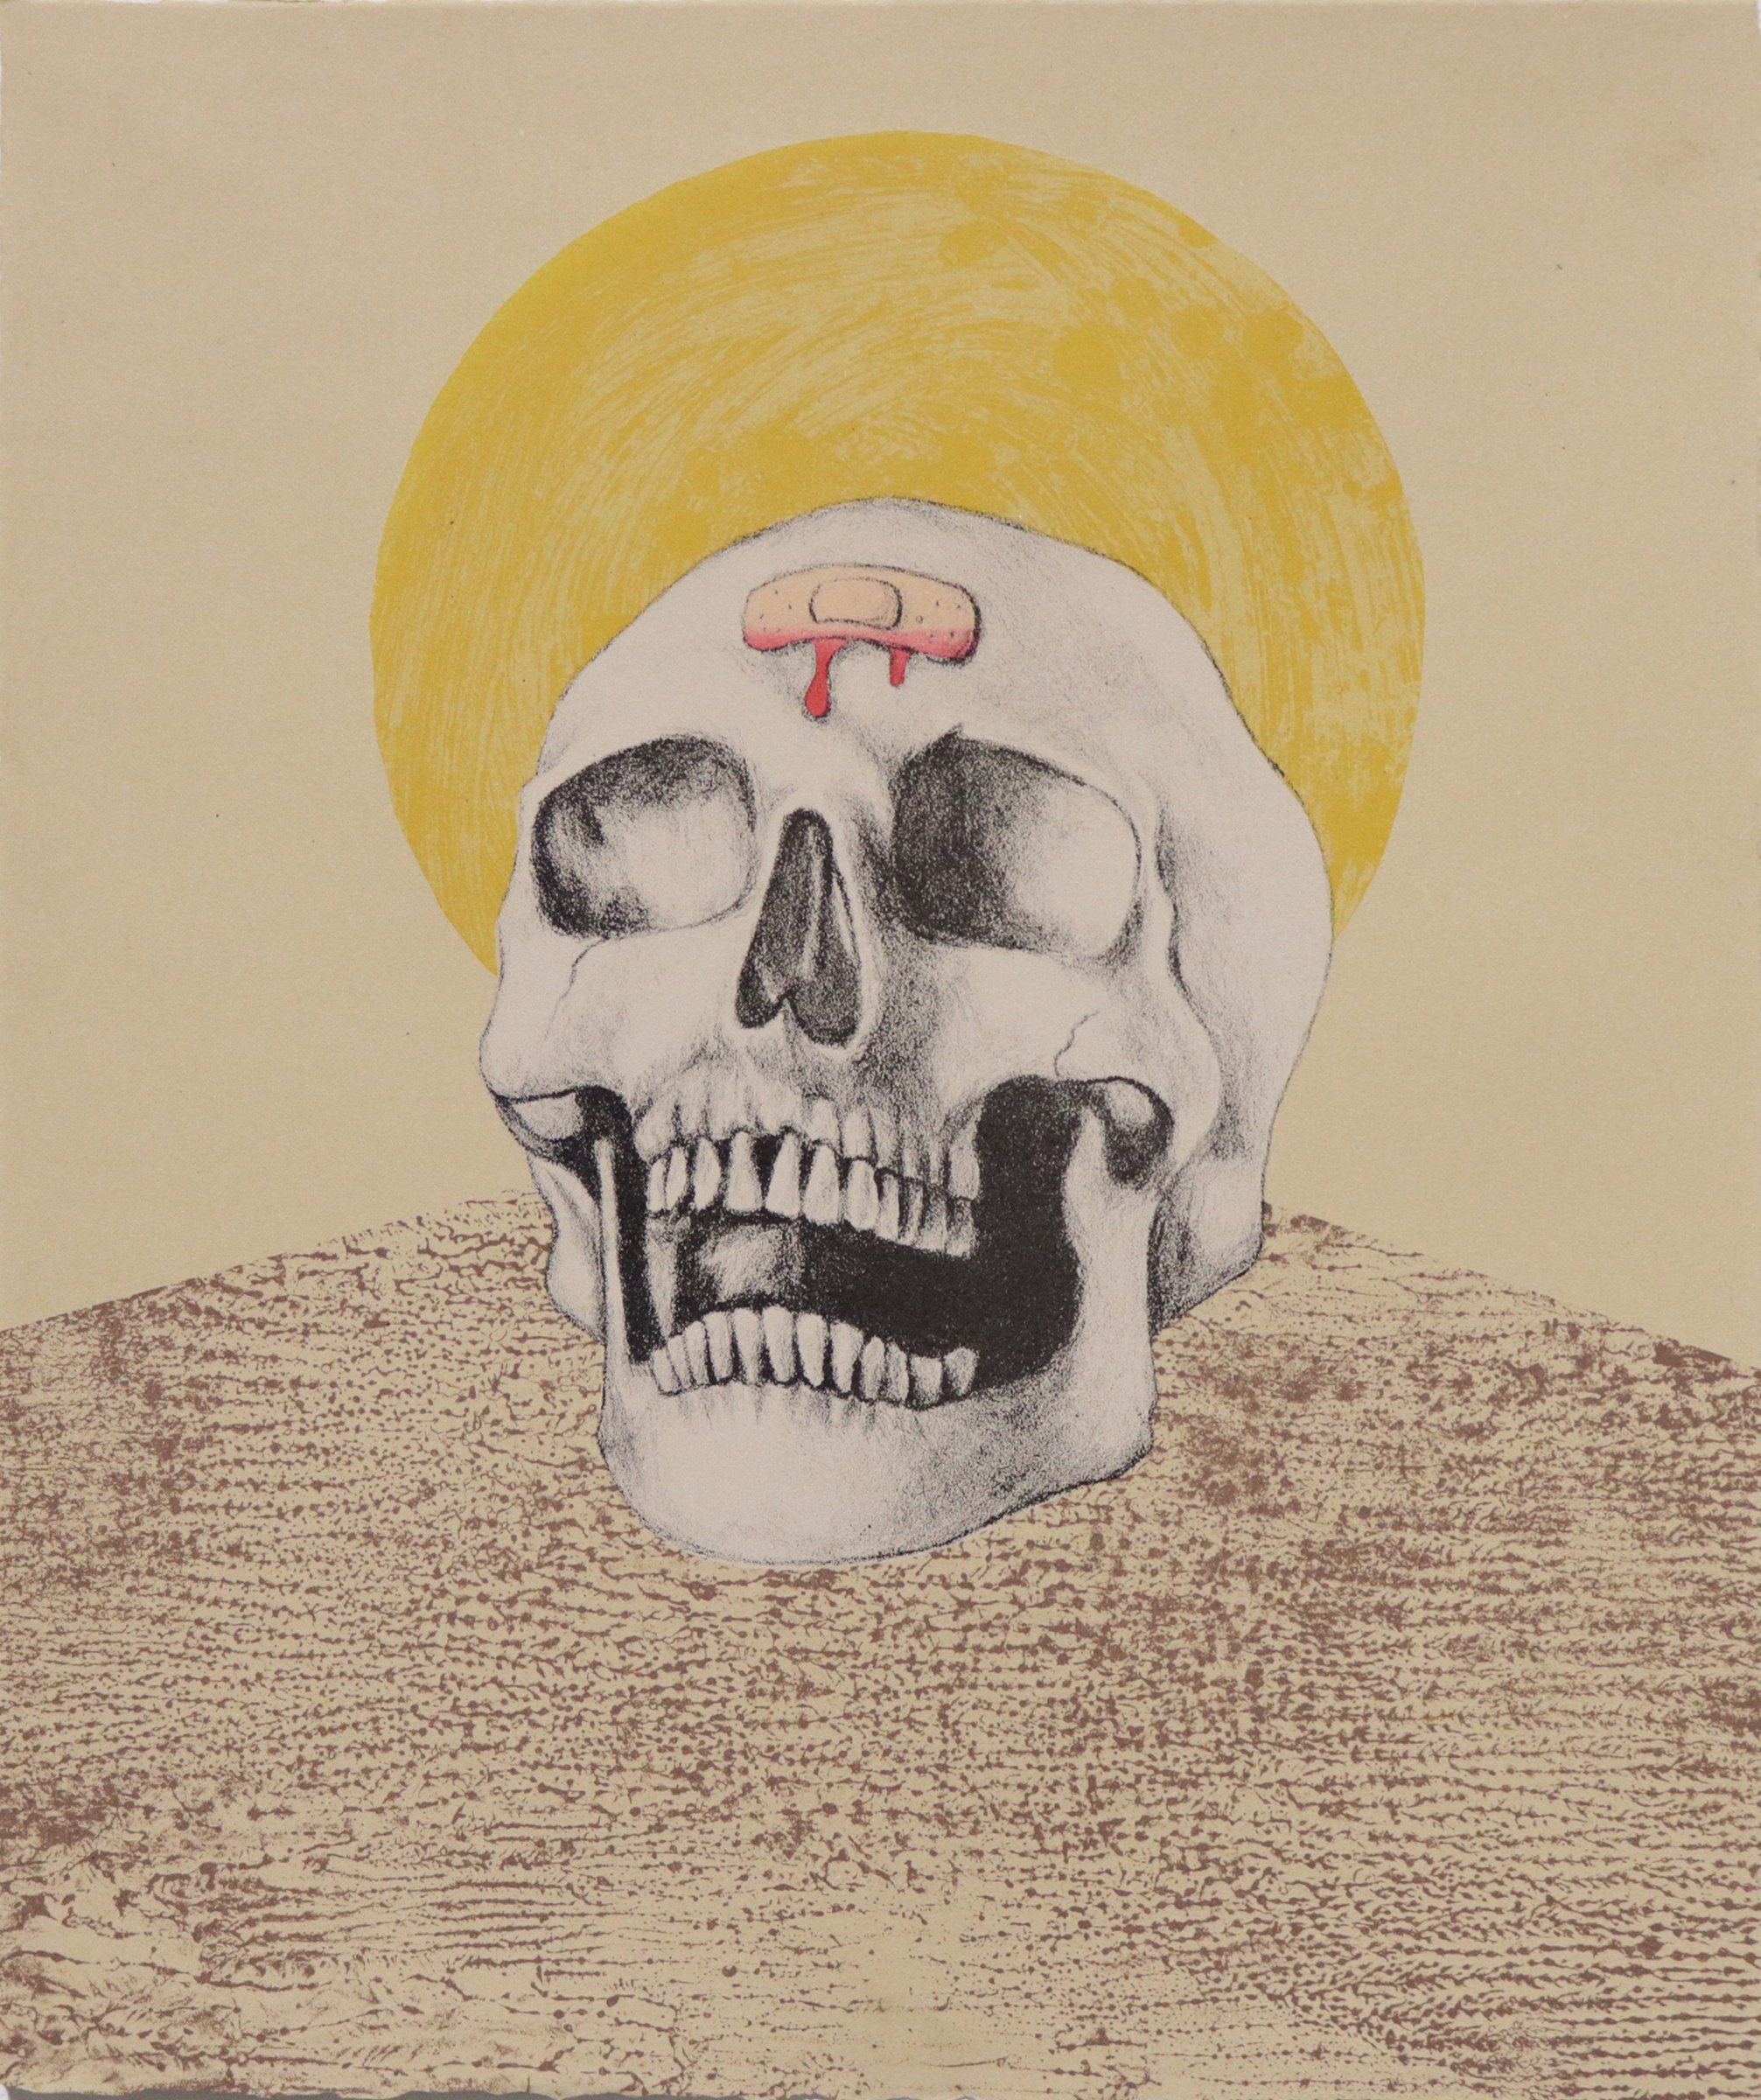 In Death lithography print by Carla Christenson.